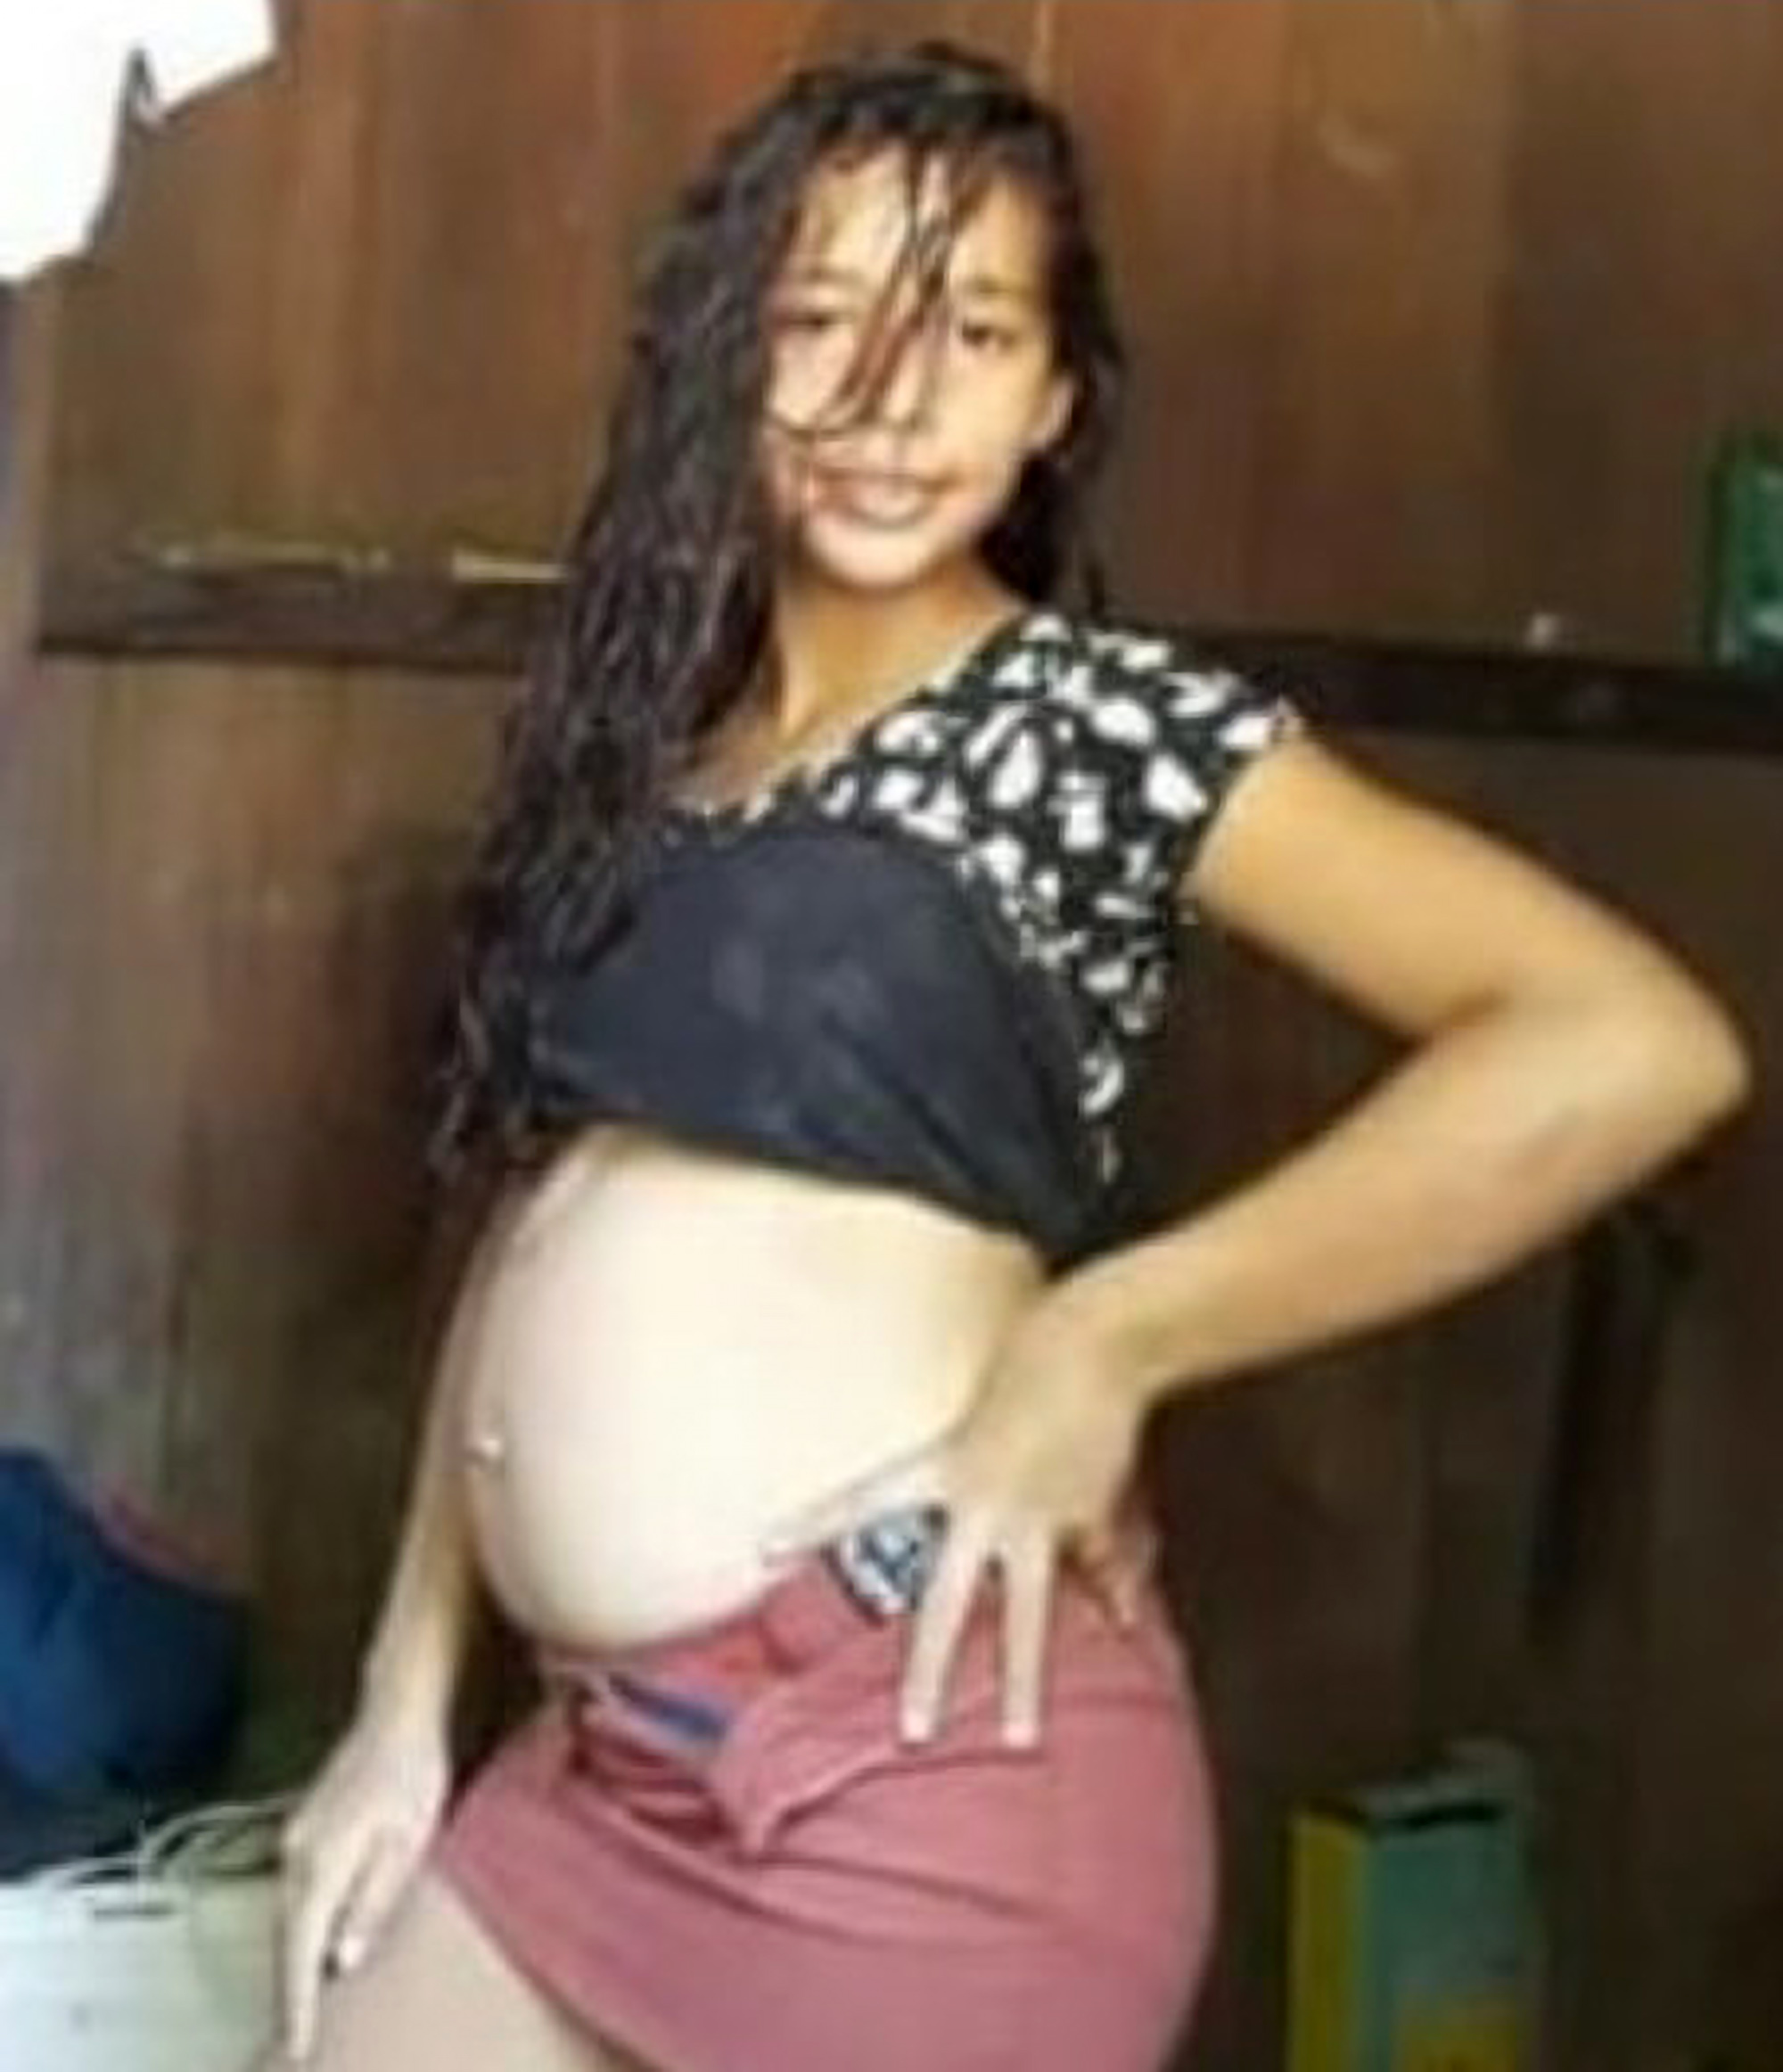 Girl, 11, Dies Giving Birth Baby Impregnated By 43-Year-Old Man Who Attacke...